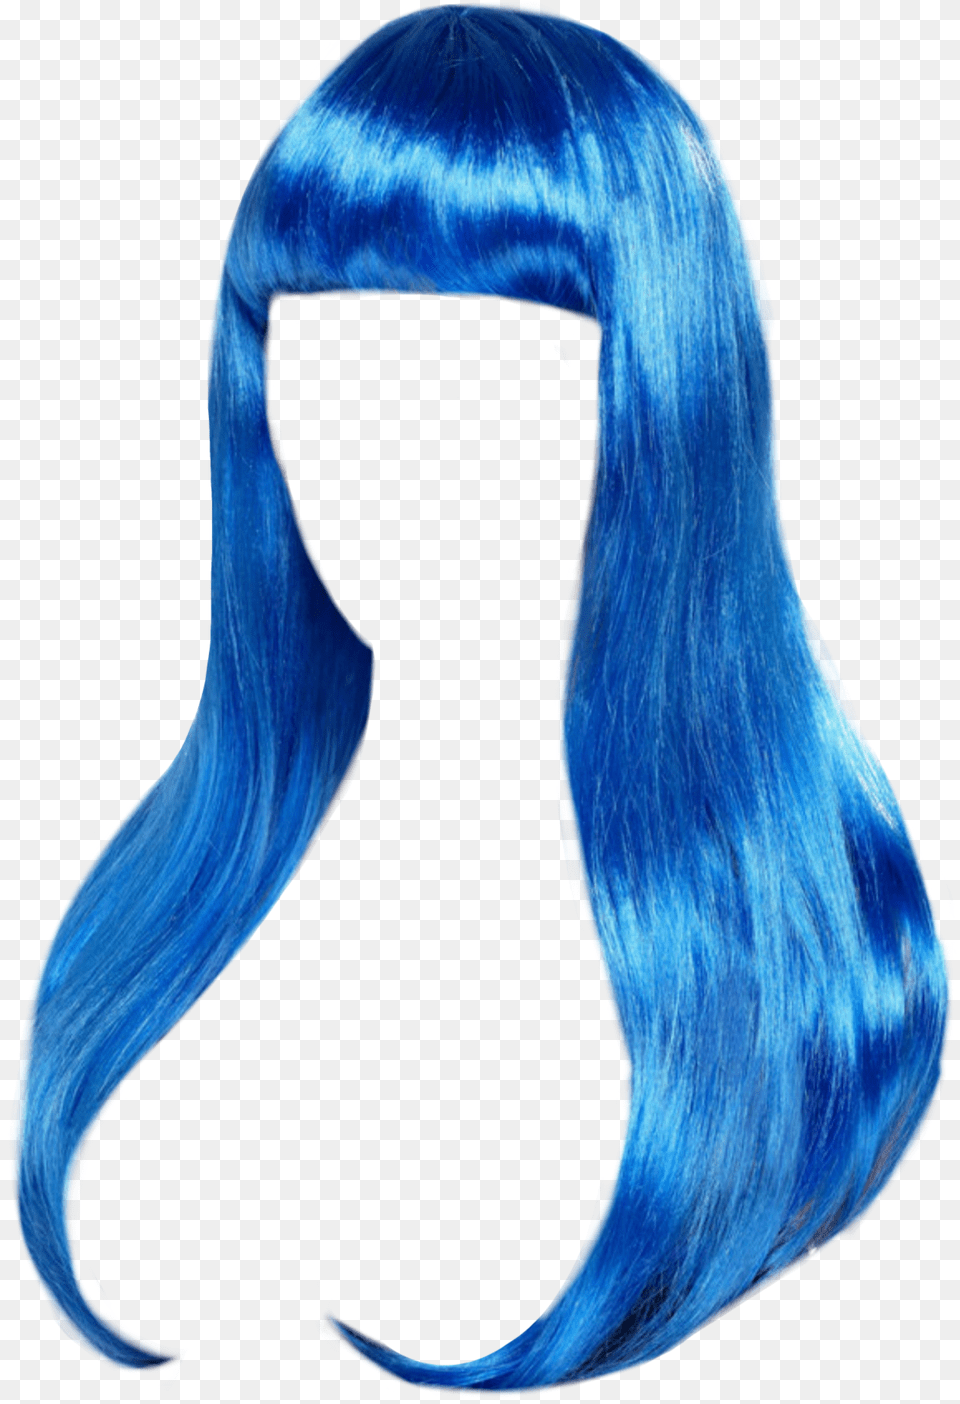 Blue Hair Wig Long Hair Longhair Azul Shiny Transparent Background Blue Wig Free Png Download